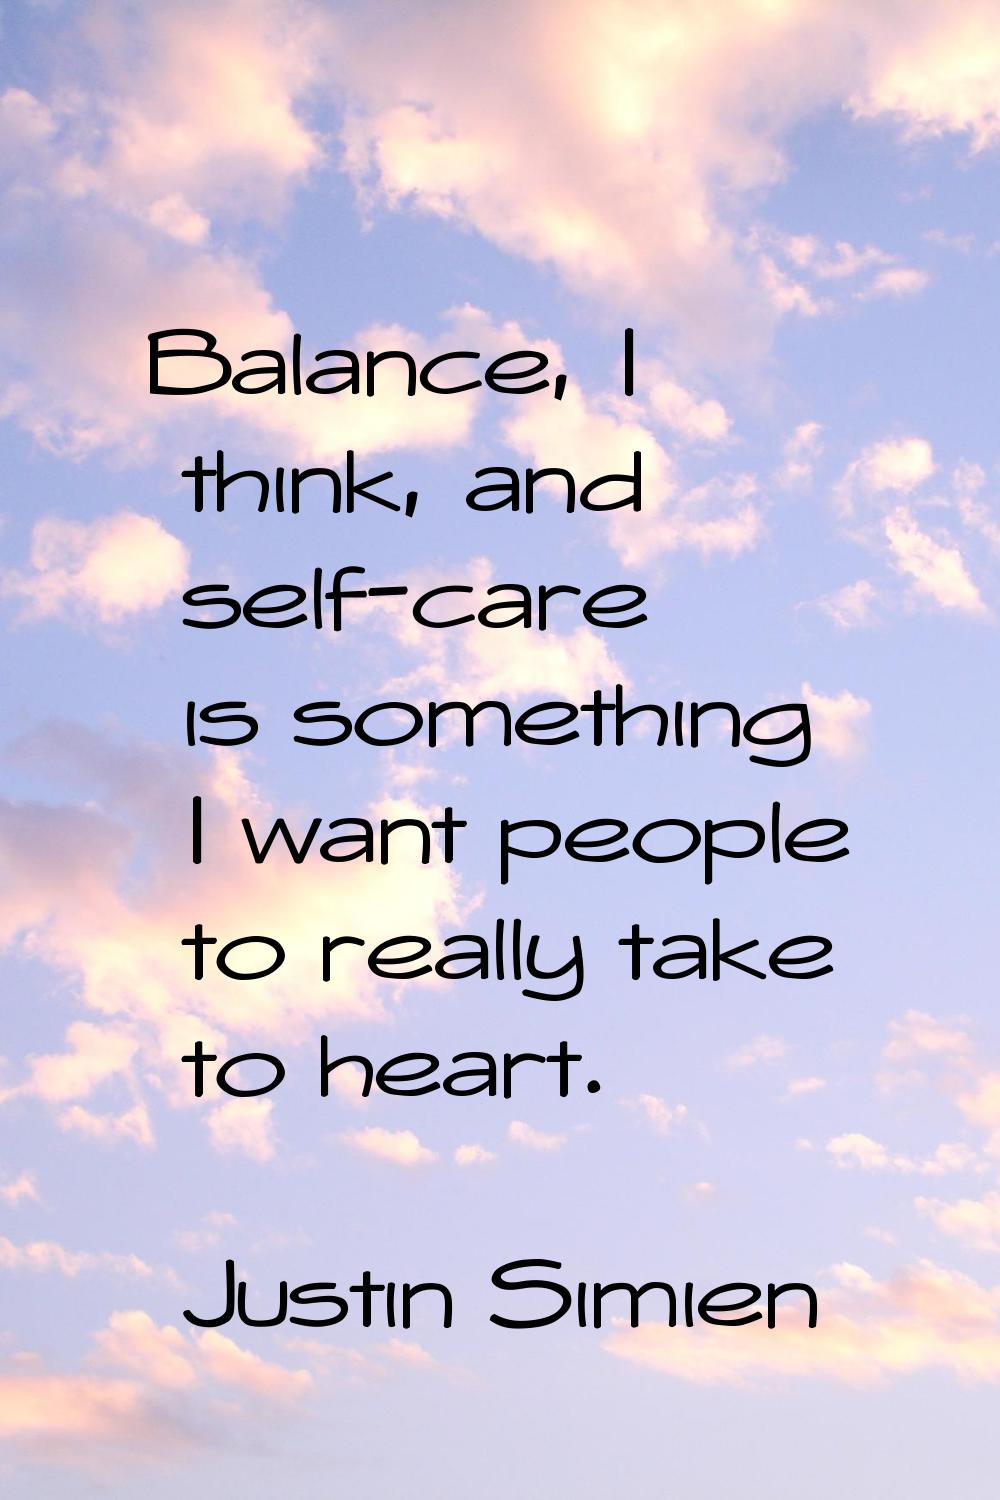 Balance, I think, and self-care is something I want people to really take to heart.